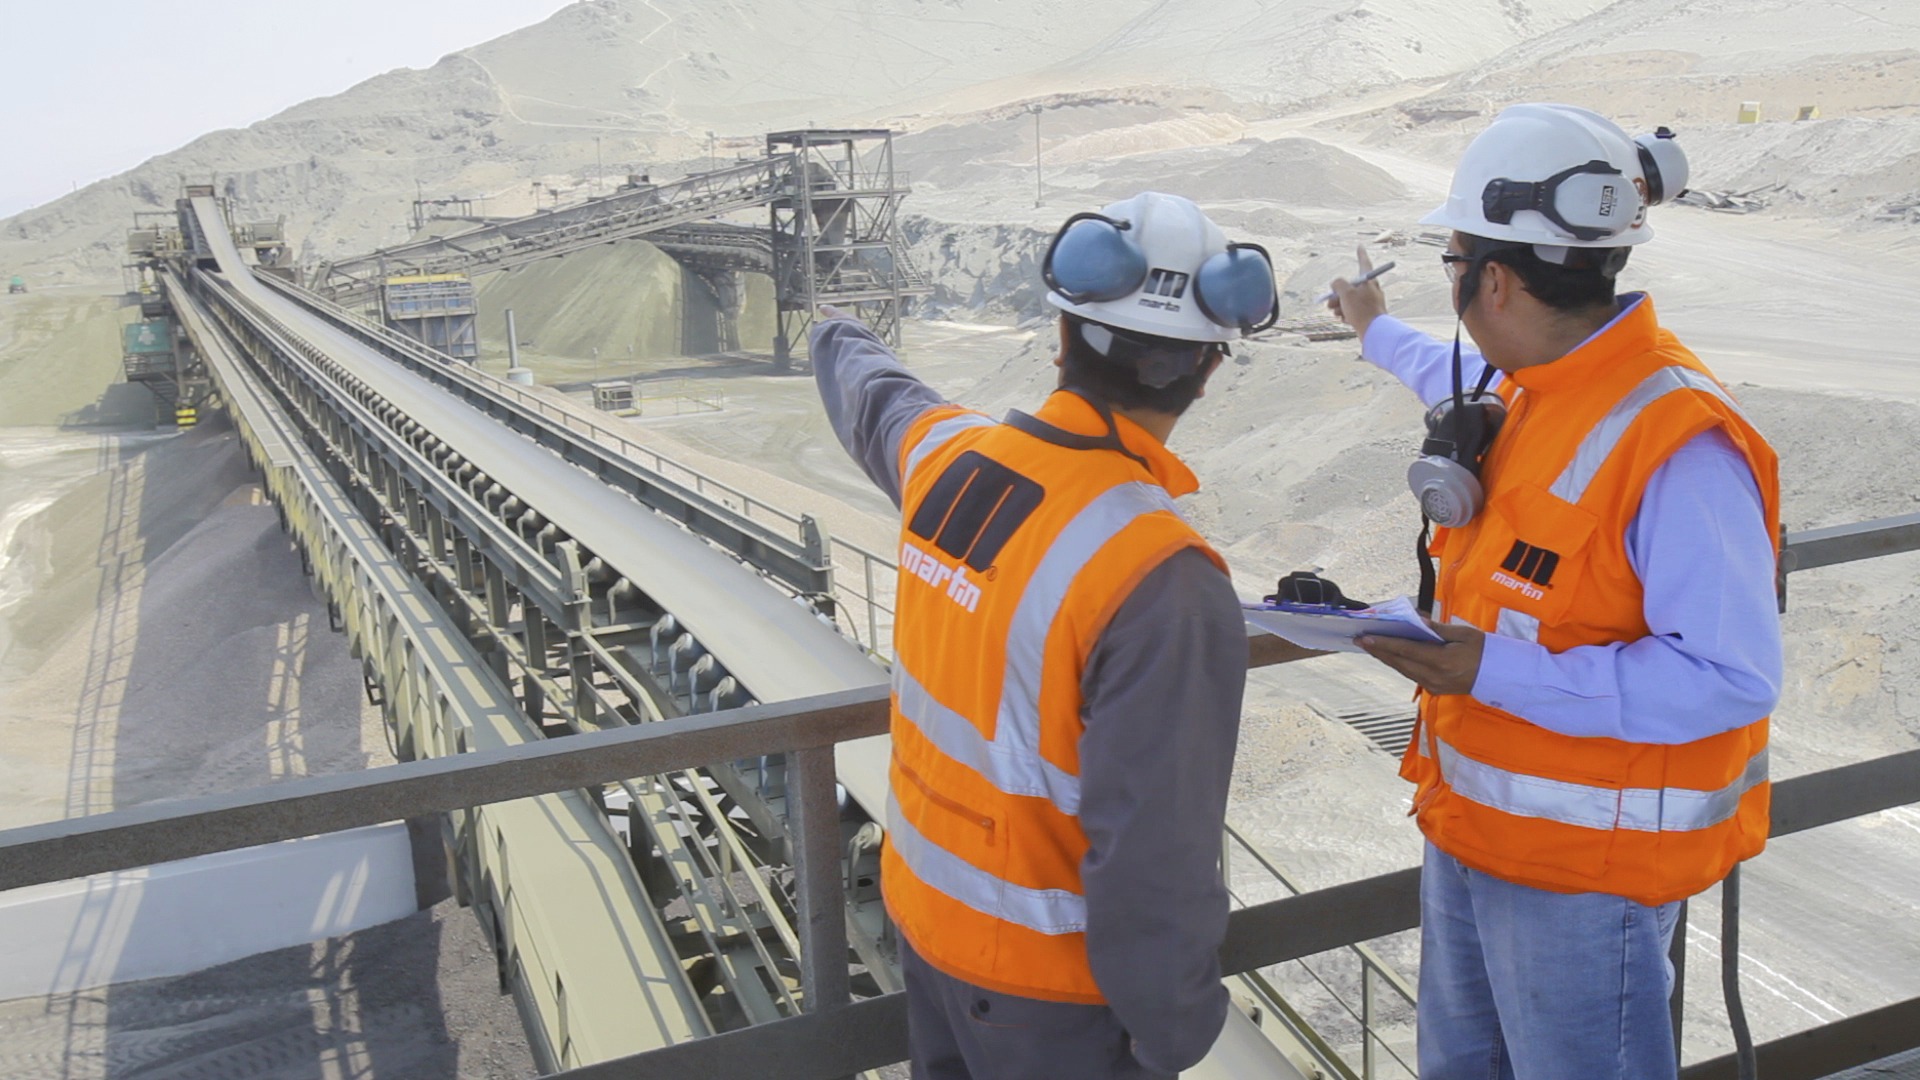 Conveyor Inspection Reduces Maintenance Costs, Improves Safety